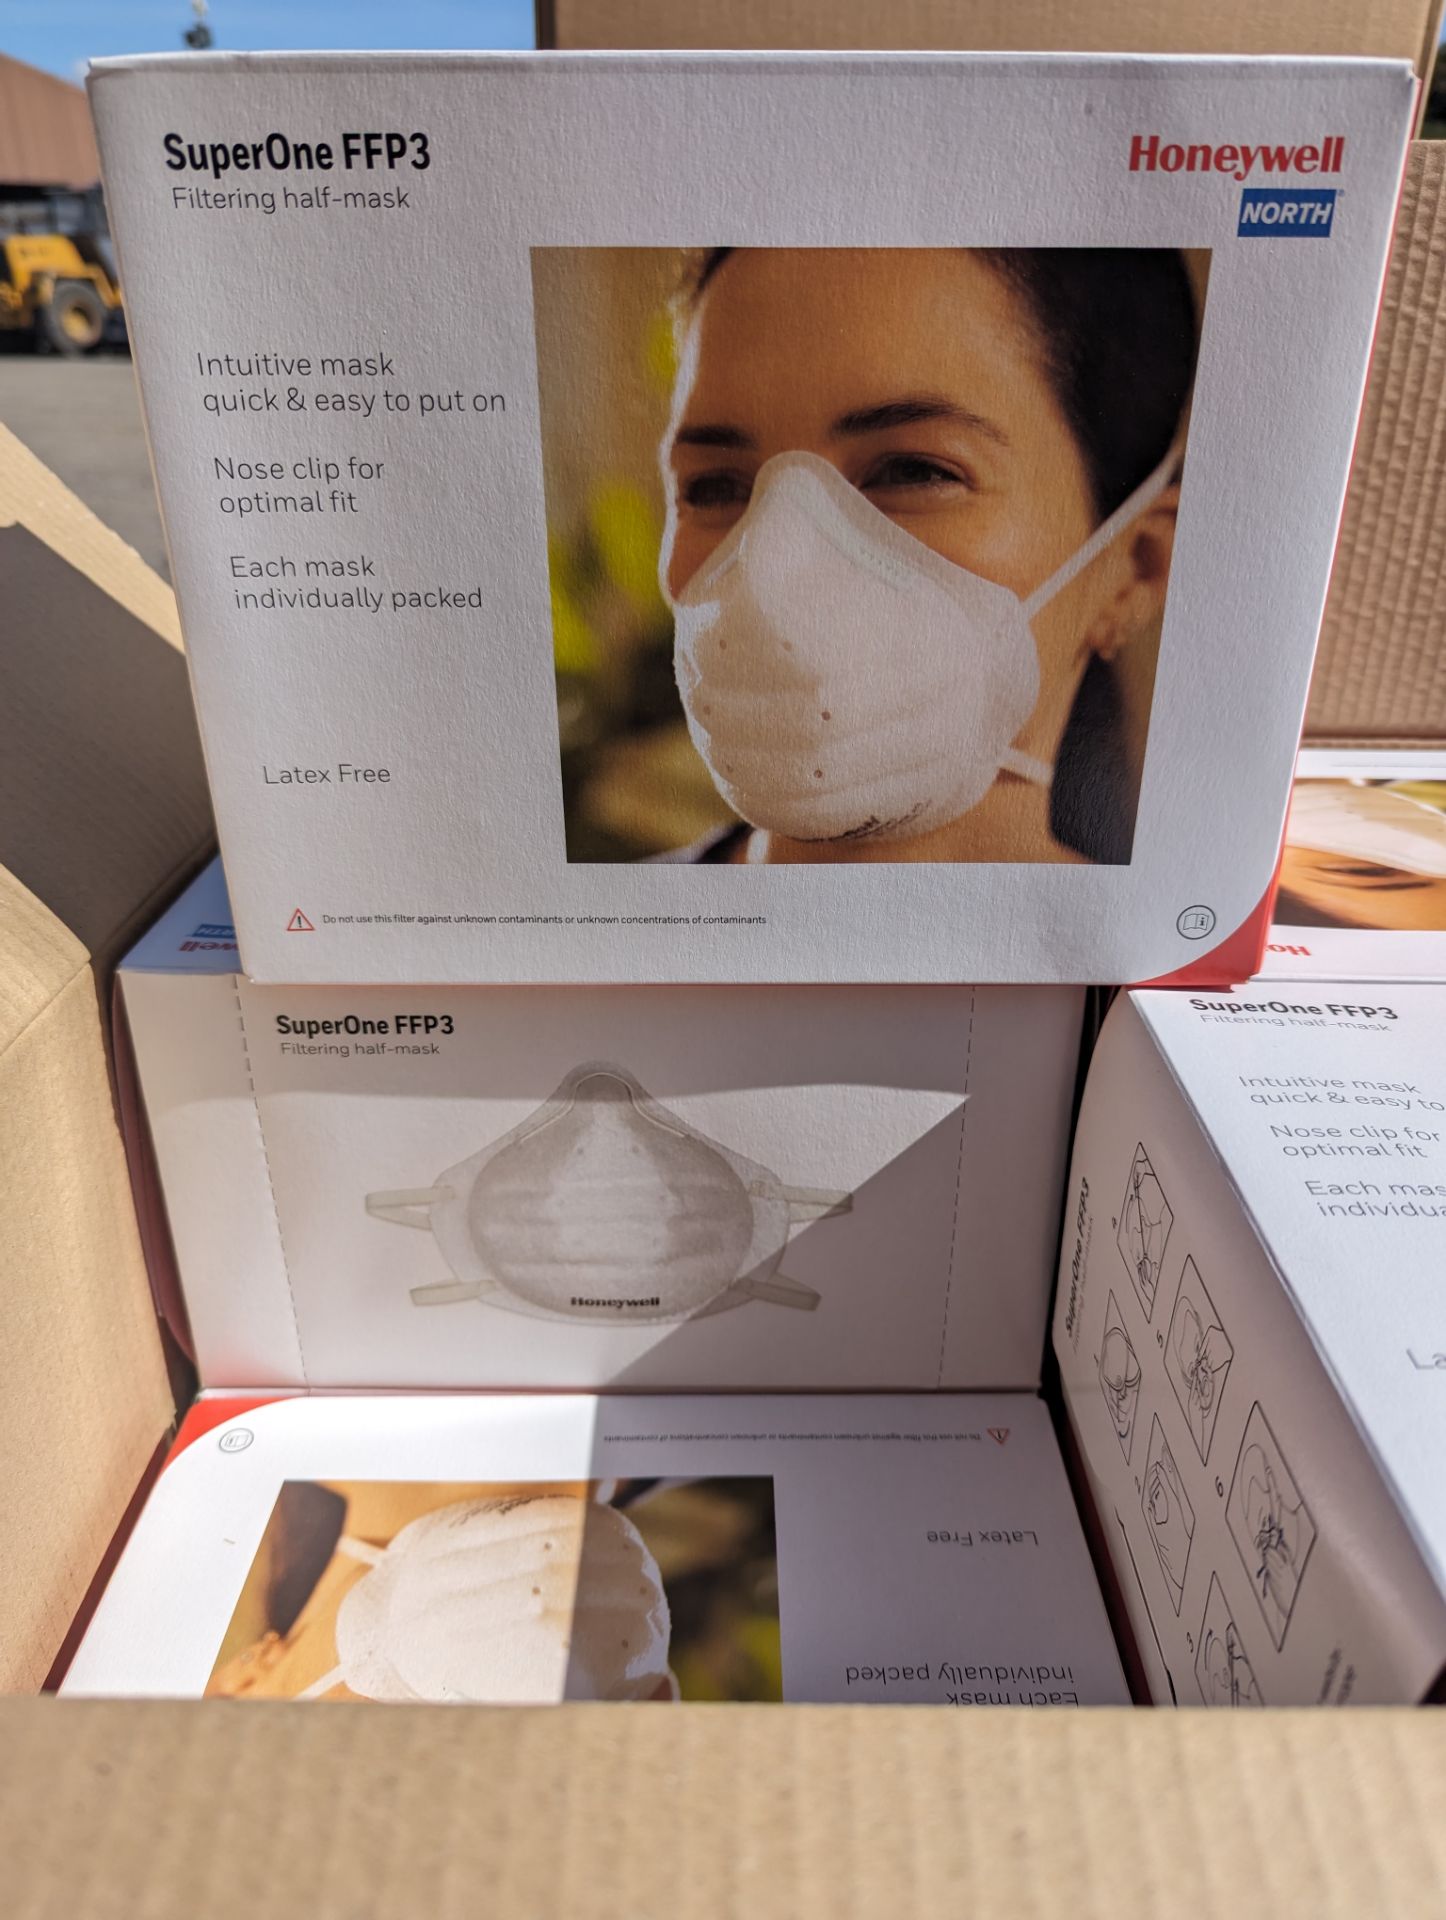 4x Boxes Honeywell SuperOne V2 ip2 FFP3 Half Mask Filter, 12 Packs of 16 Units Each Per Box - Image 2 of 6